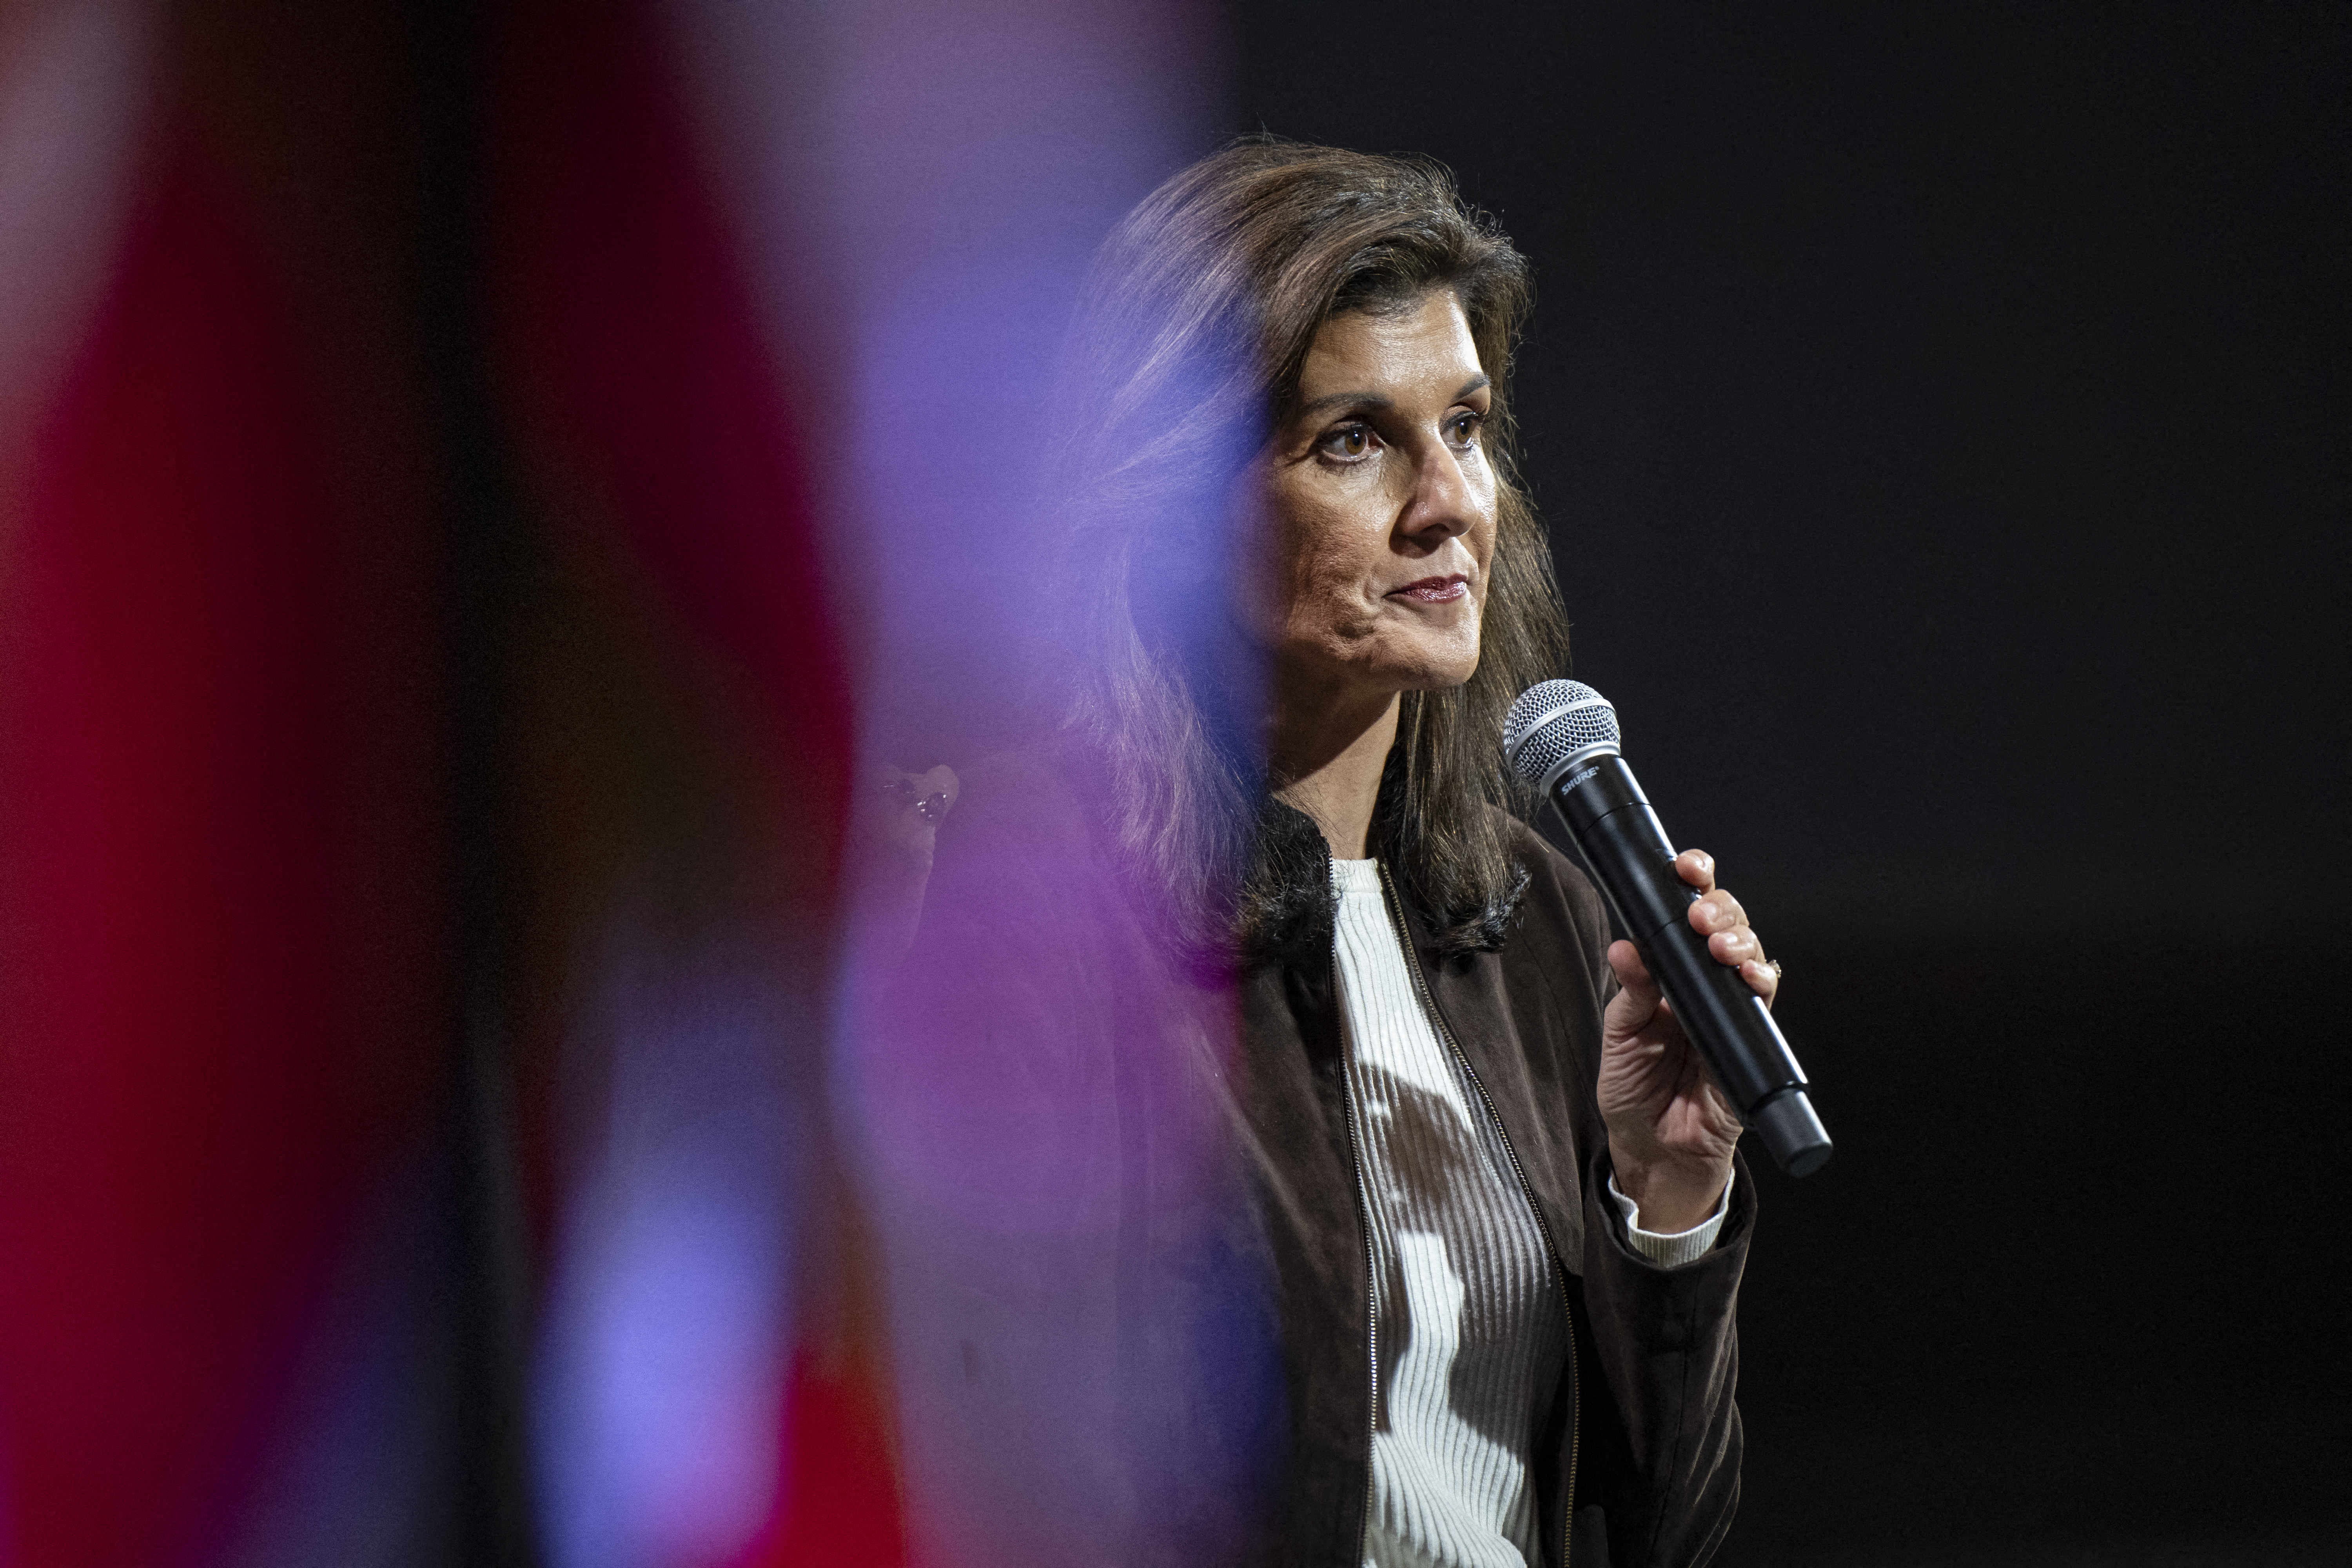 Haley, in a black jacket and white shirt, looks solemn as she speaks into a microphone on a dark stage.